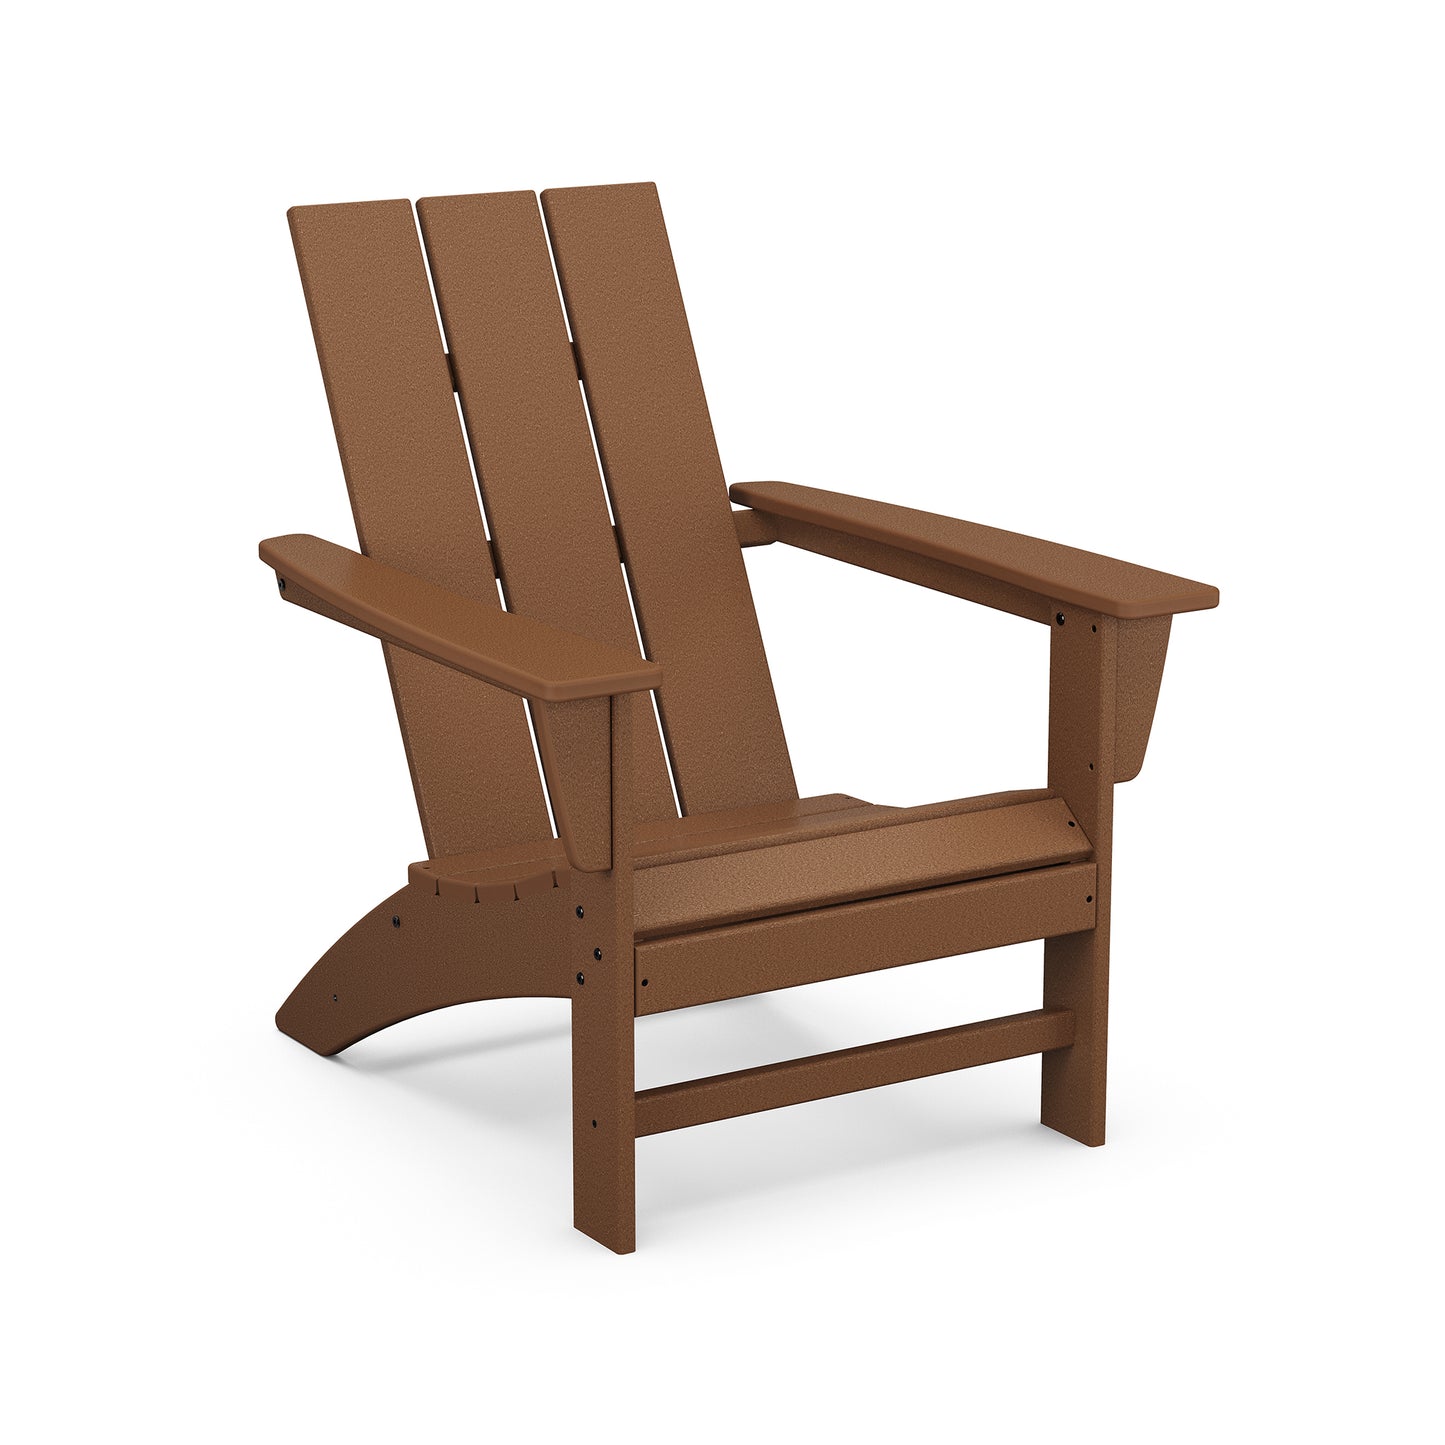 An elegant Modern Adirondack chair made of POLYWOOD lumber, perfect for outdoor furniture, set against a clean white background.